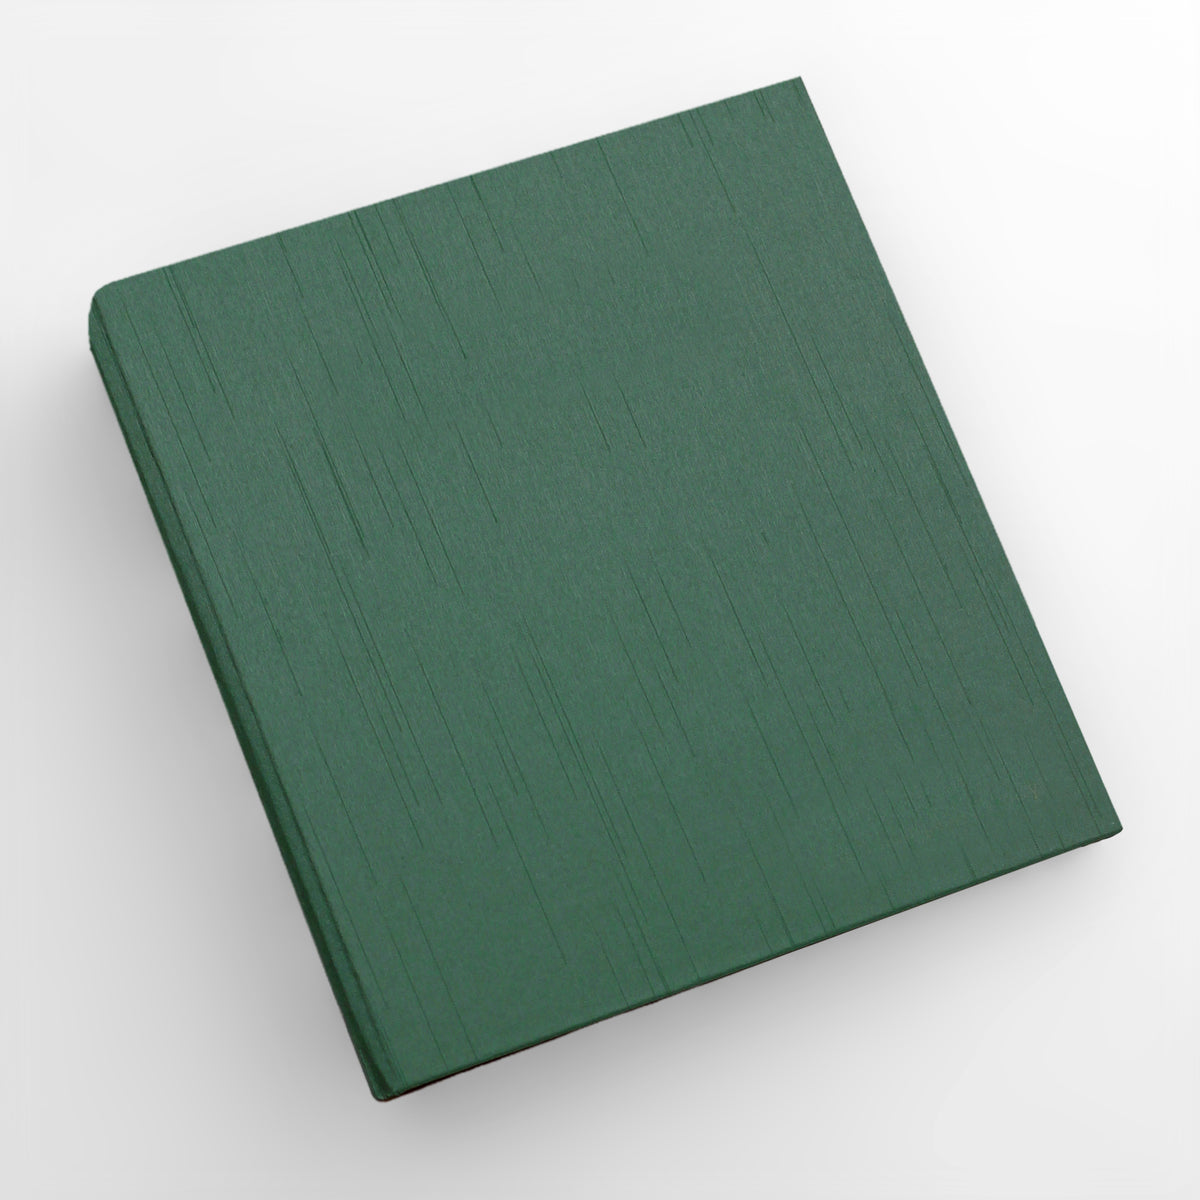 Storage Binder for Photos or Documents with Emerald Silk Cover